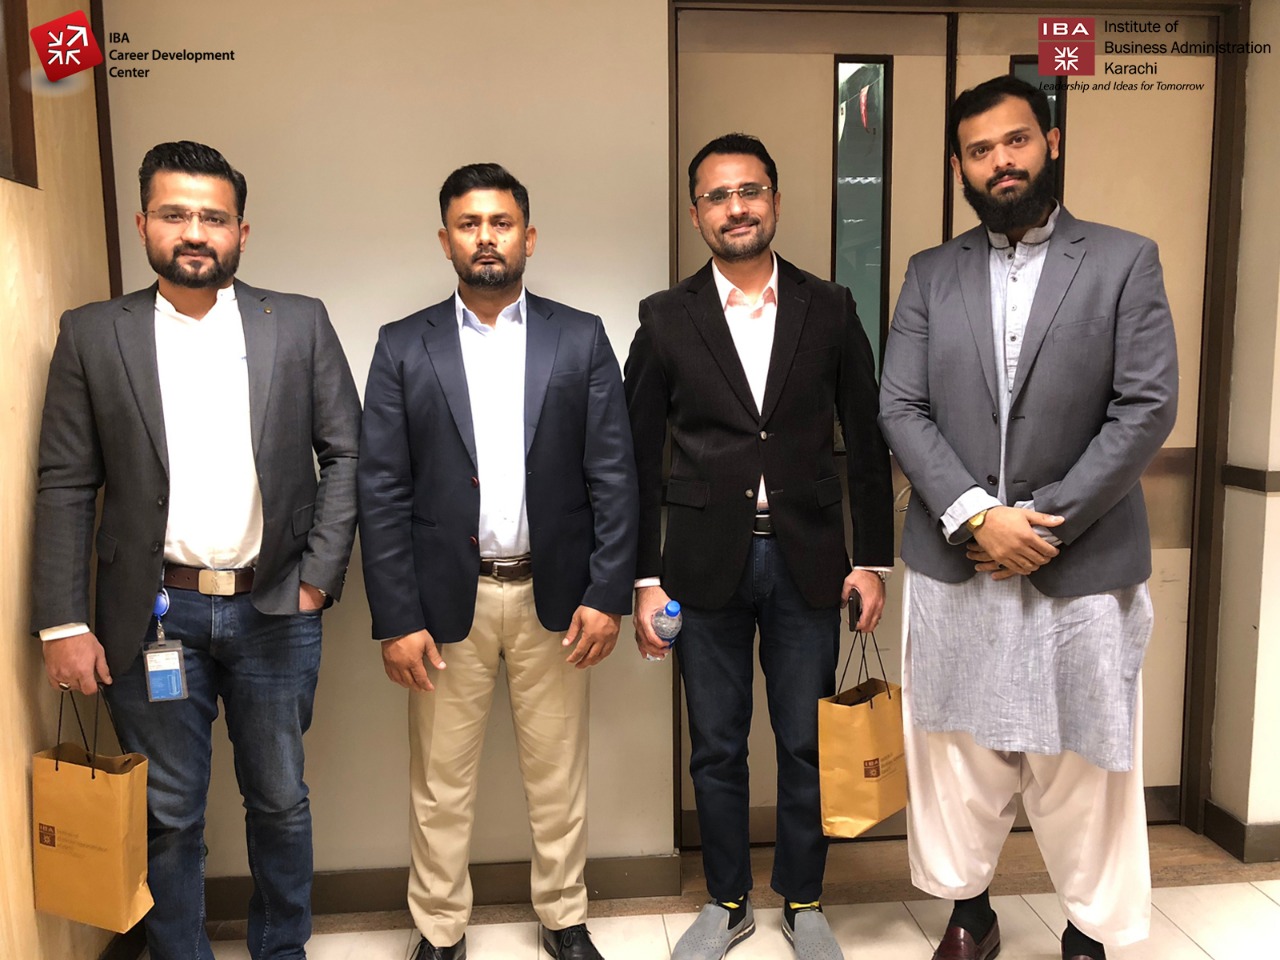 IBA – Career Development Center met with UBL - Talent Acquisition team